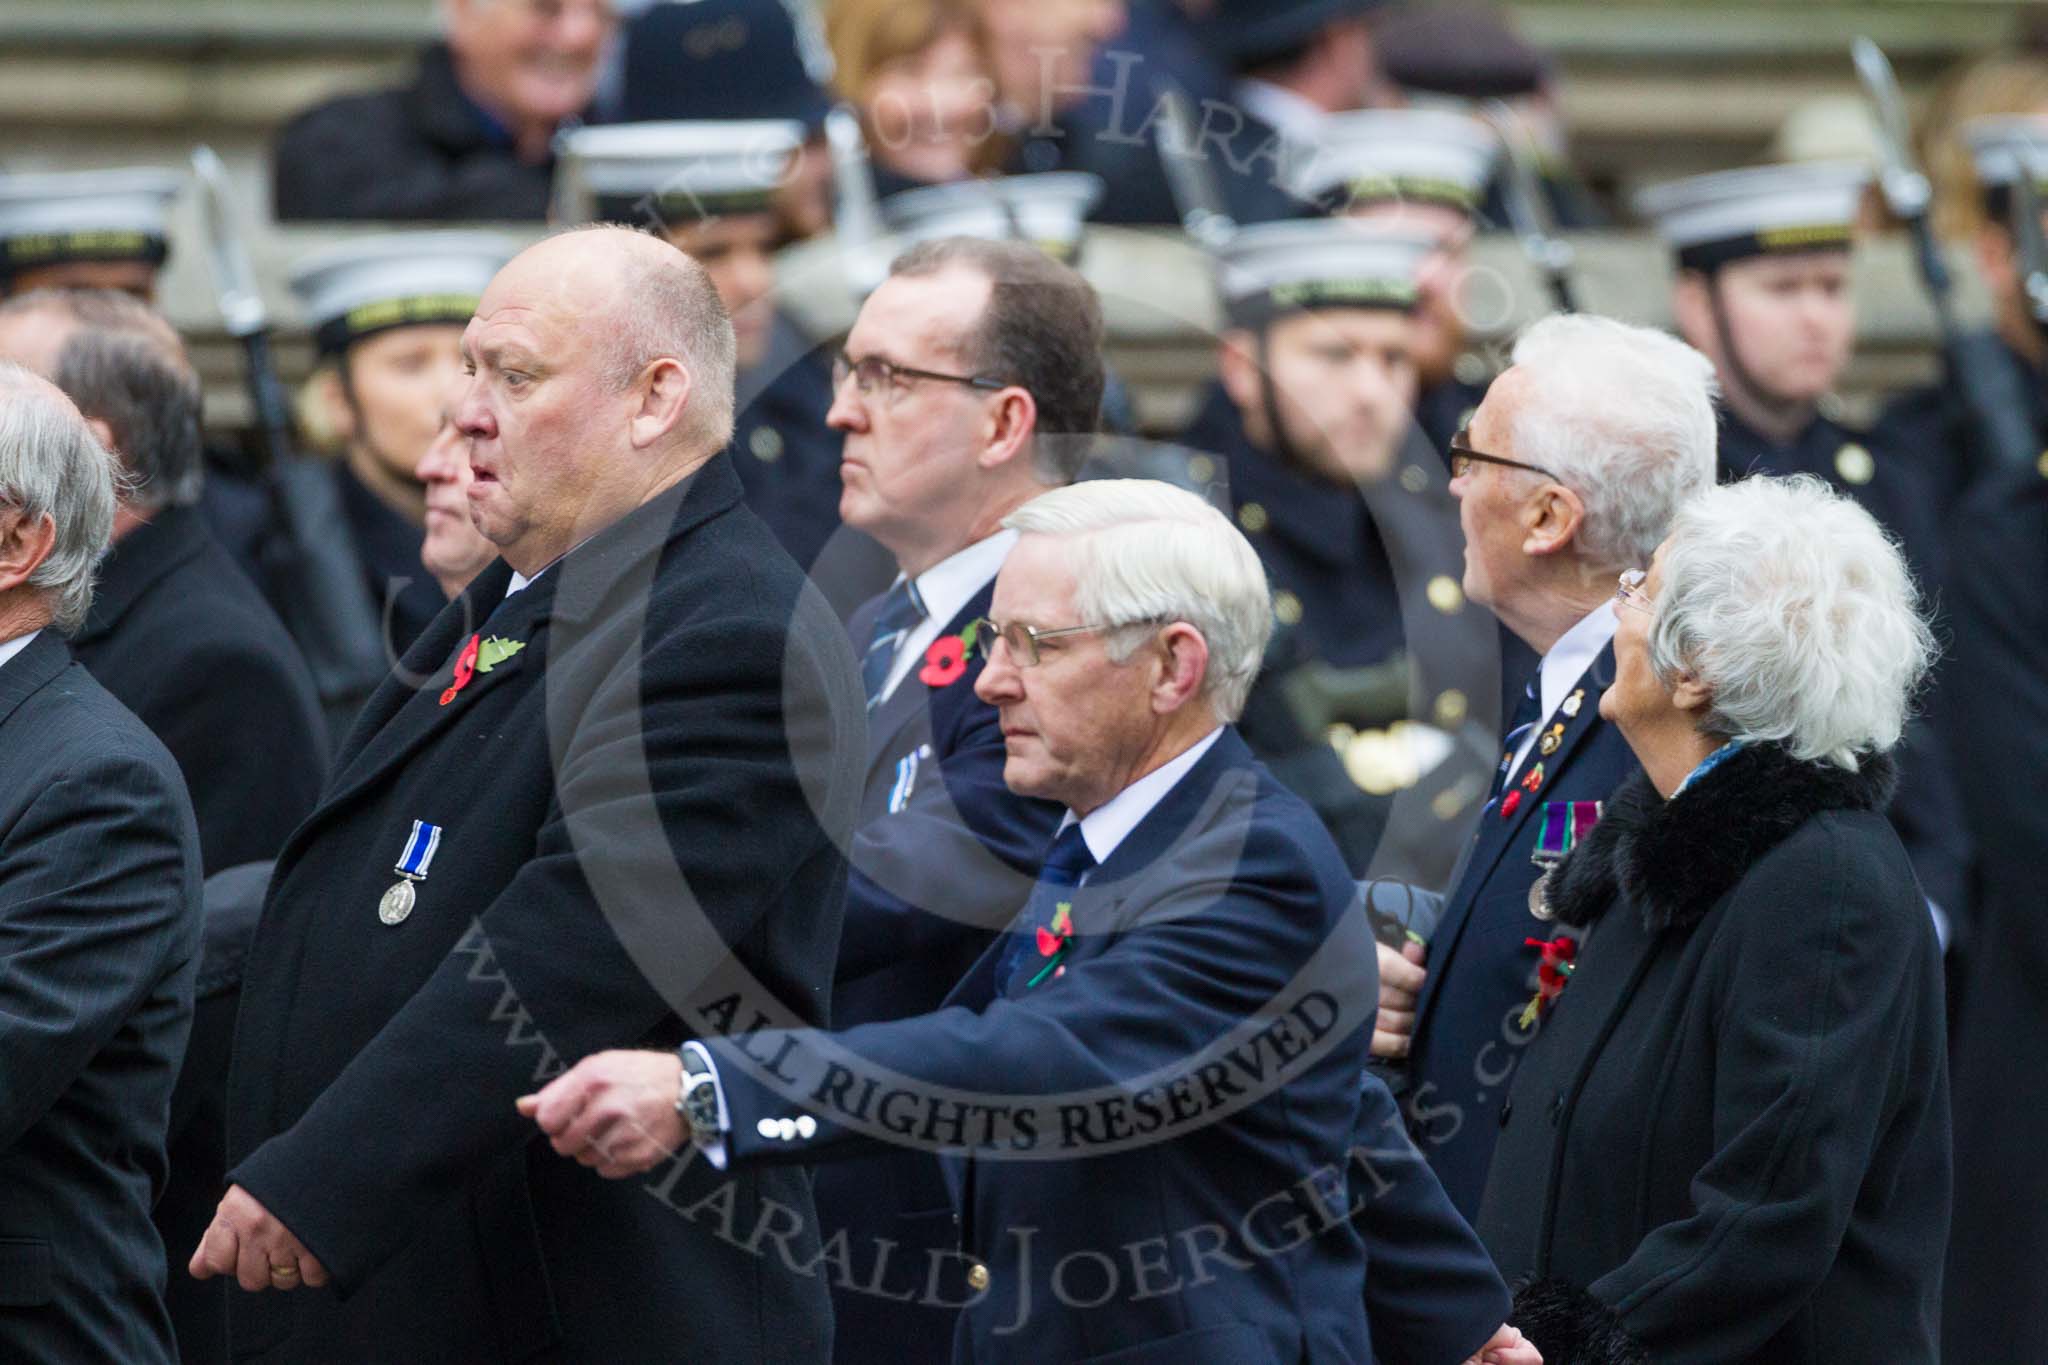 Remembrance Sunday at the Cenotaph 2015: Group M11, National Association of Retired Police Officers.
Cenotaph, Whitehall, London SW1,
London,
Greater London,
United Kingdom,
on 08 November 2015 at 12:15, image #1473